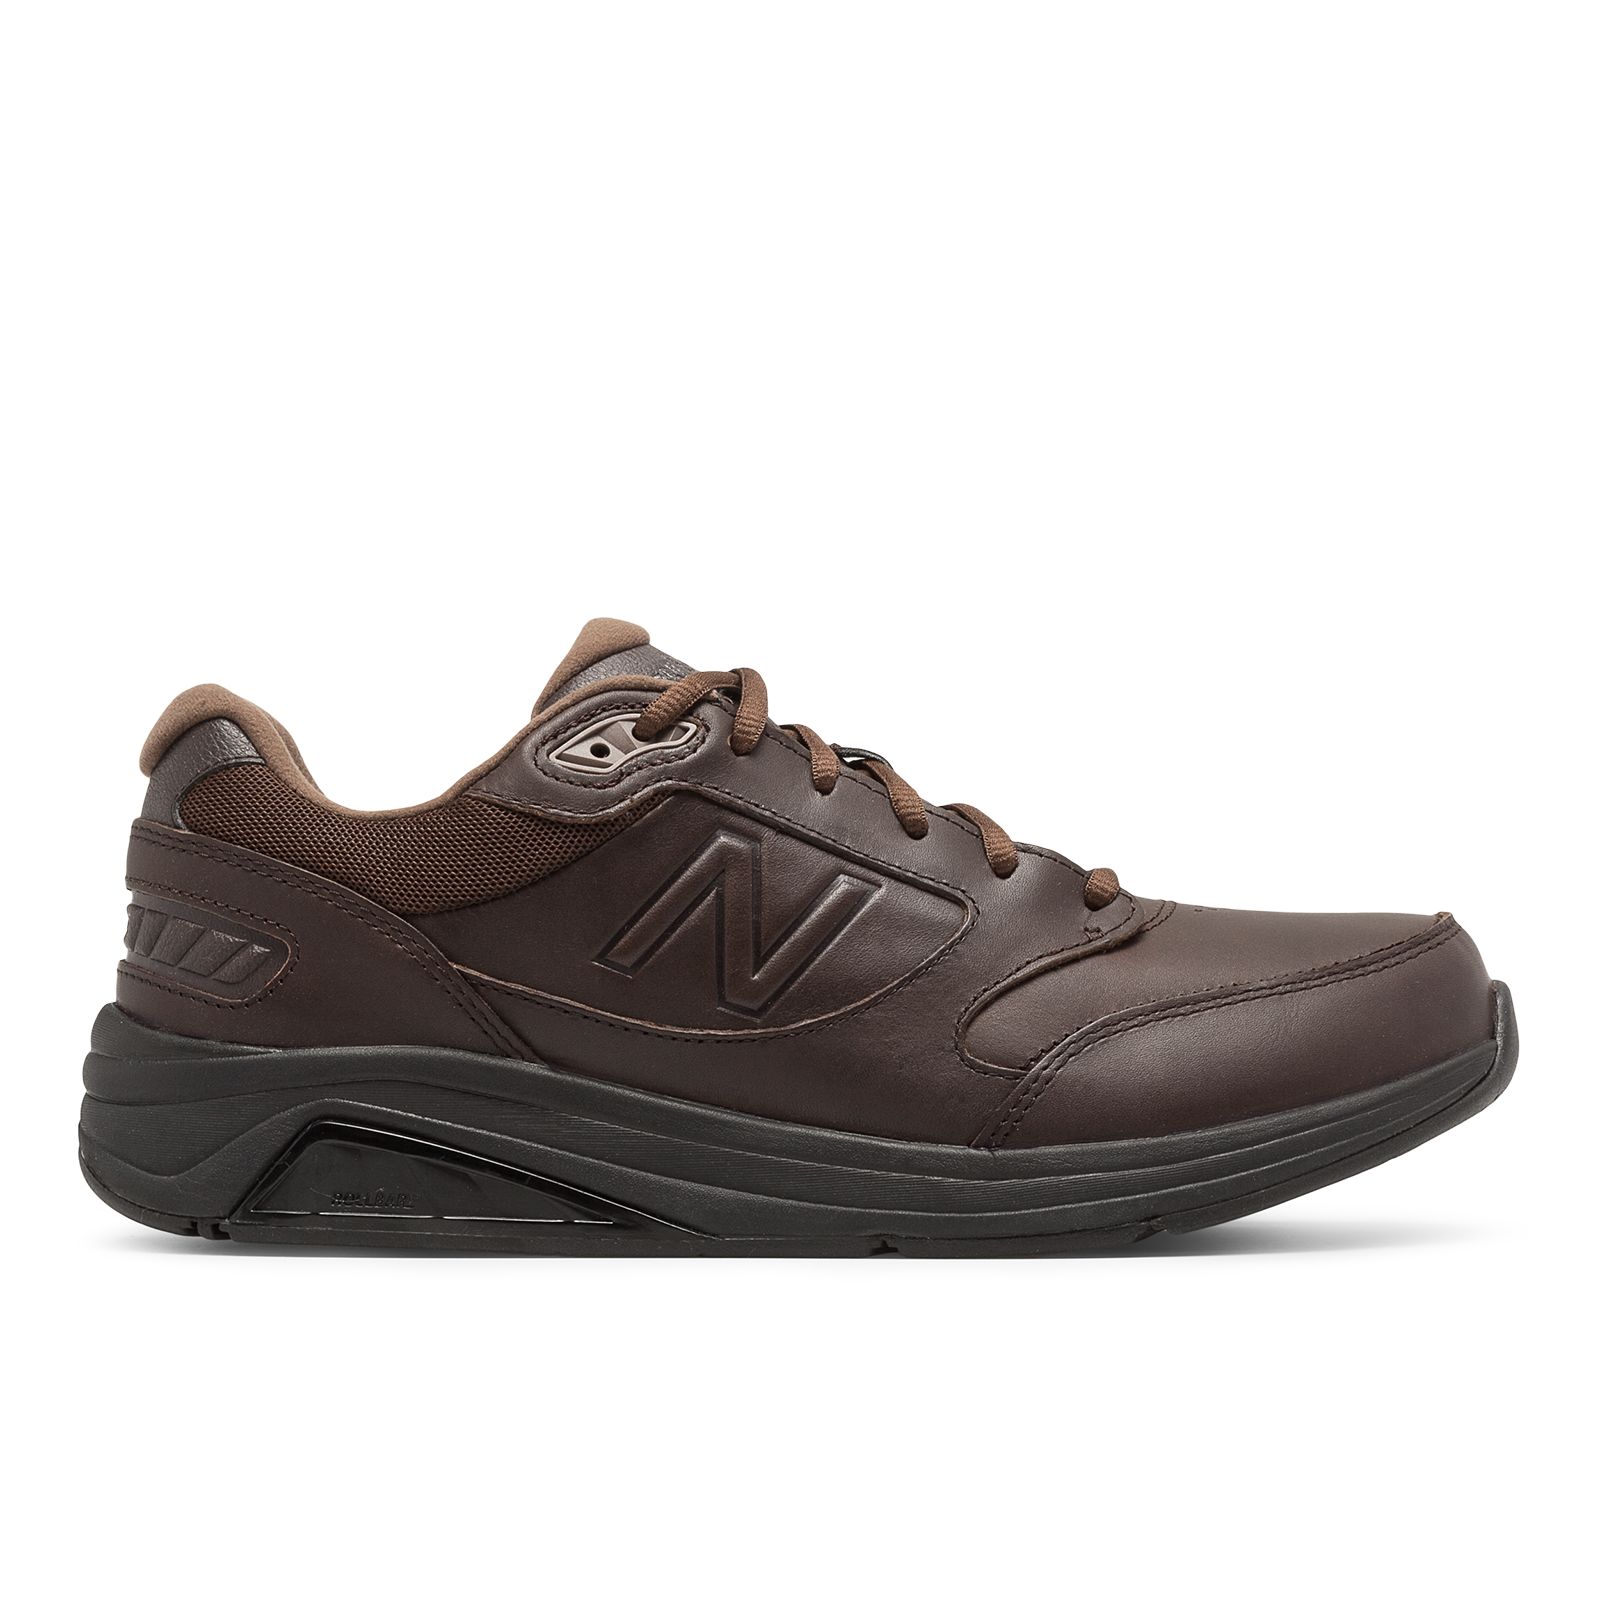 all leather new balance shoes